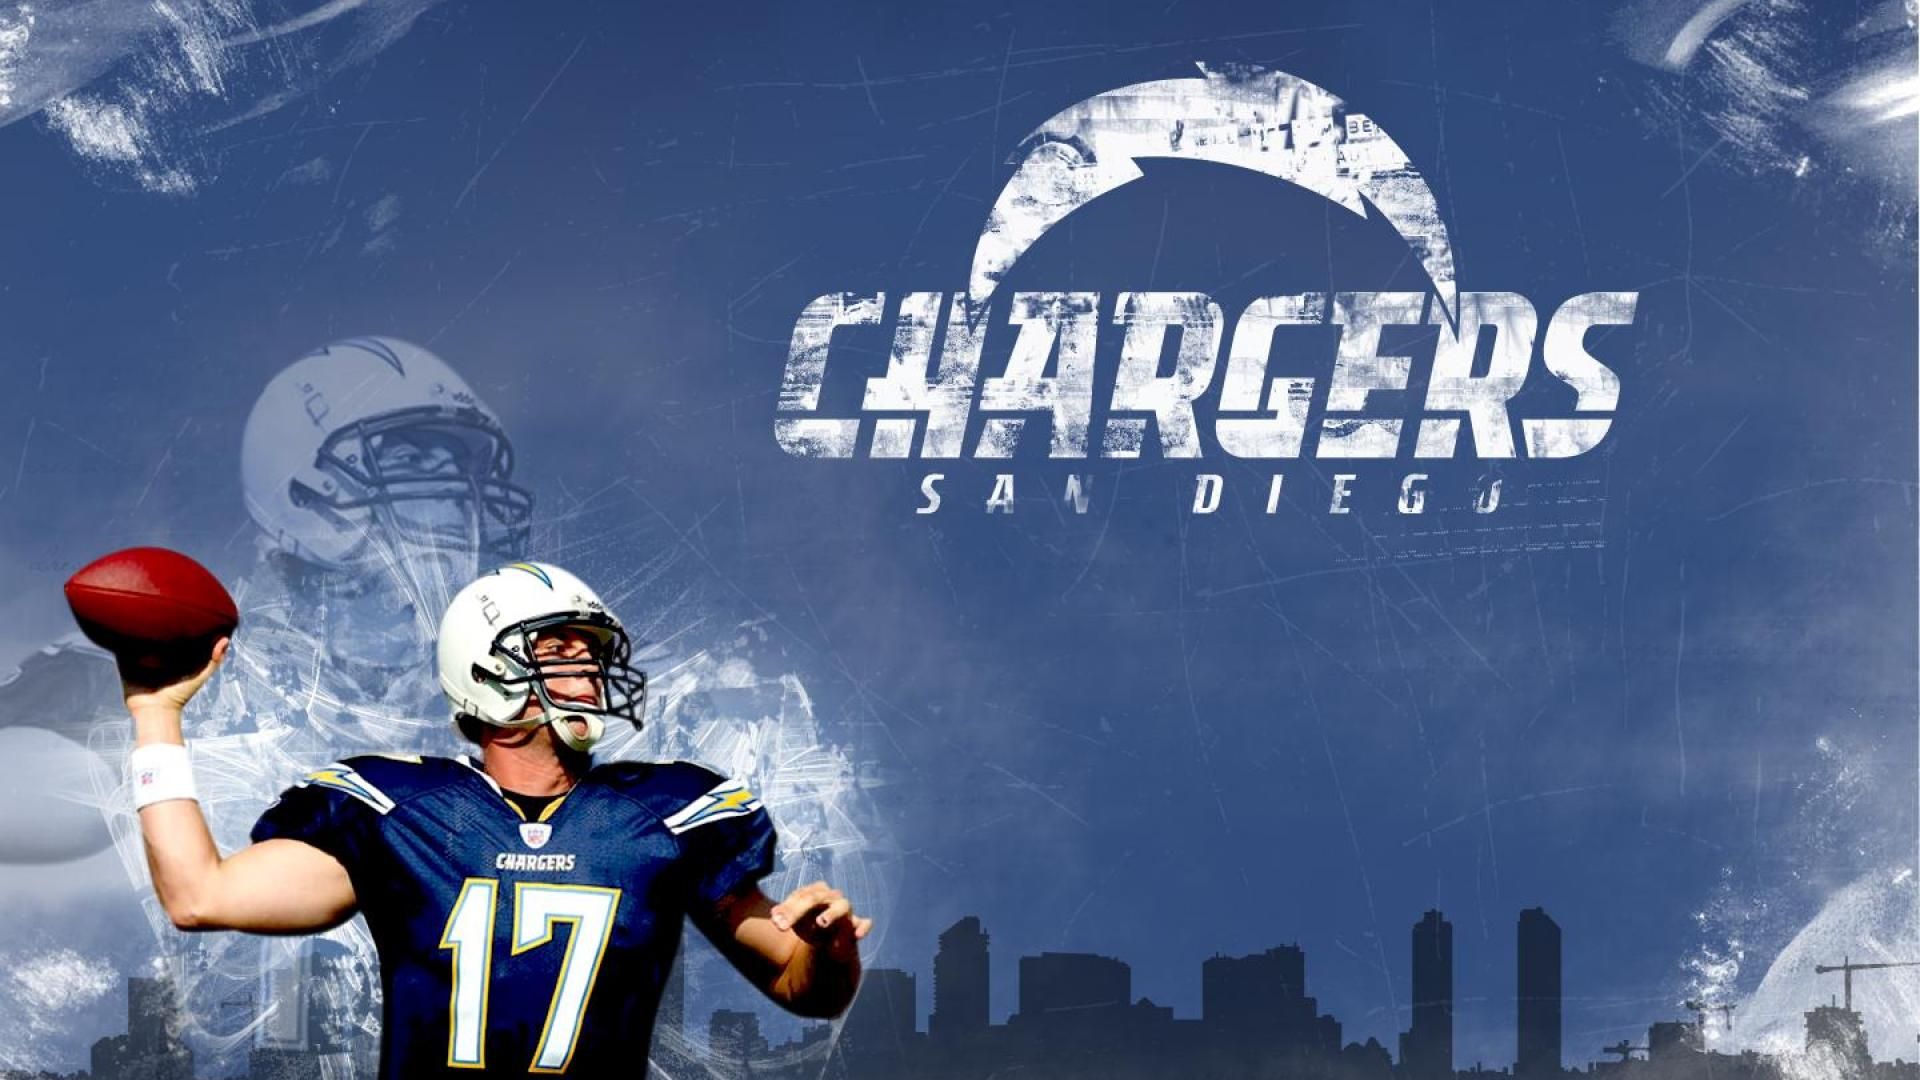 HD wallpaper, Chargers, Diego, San